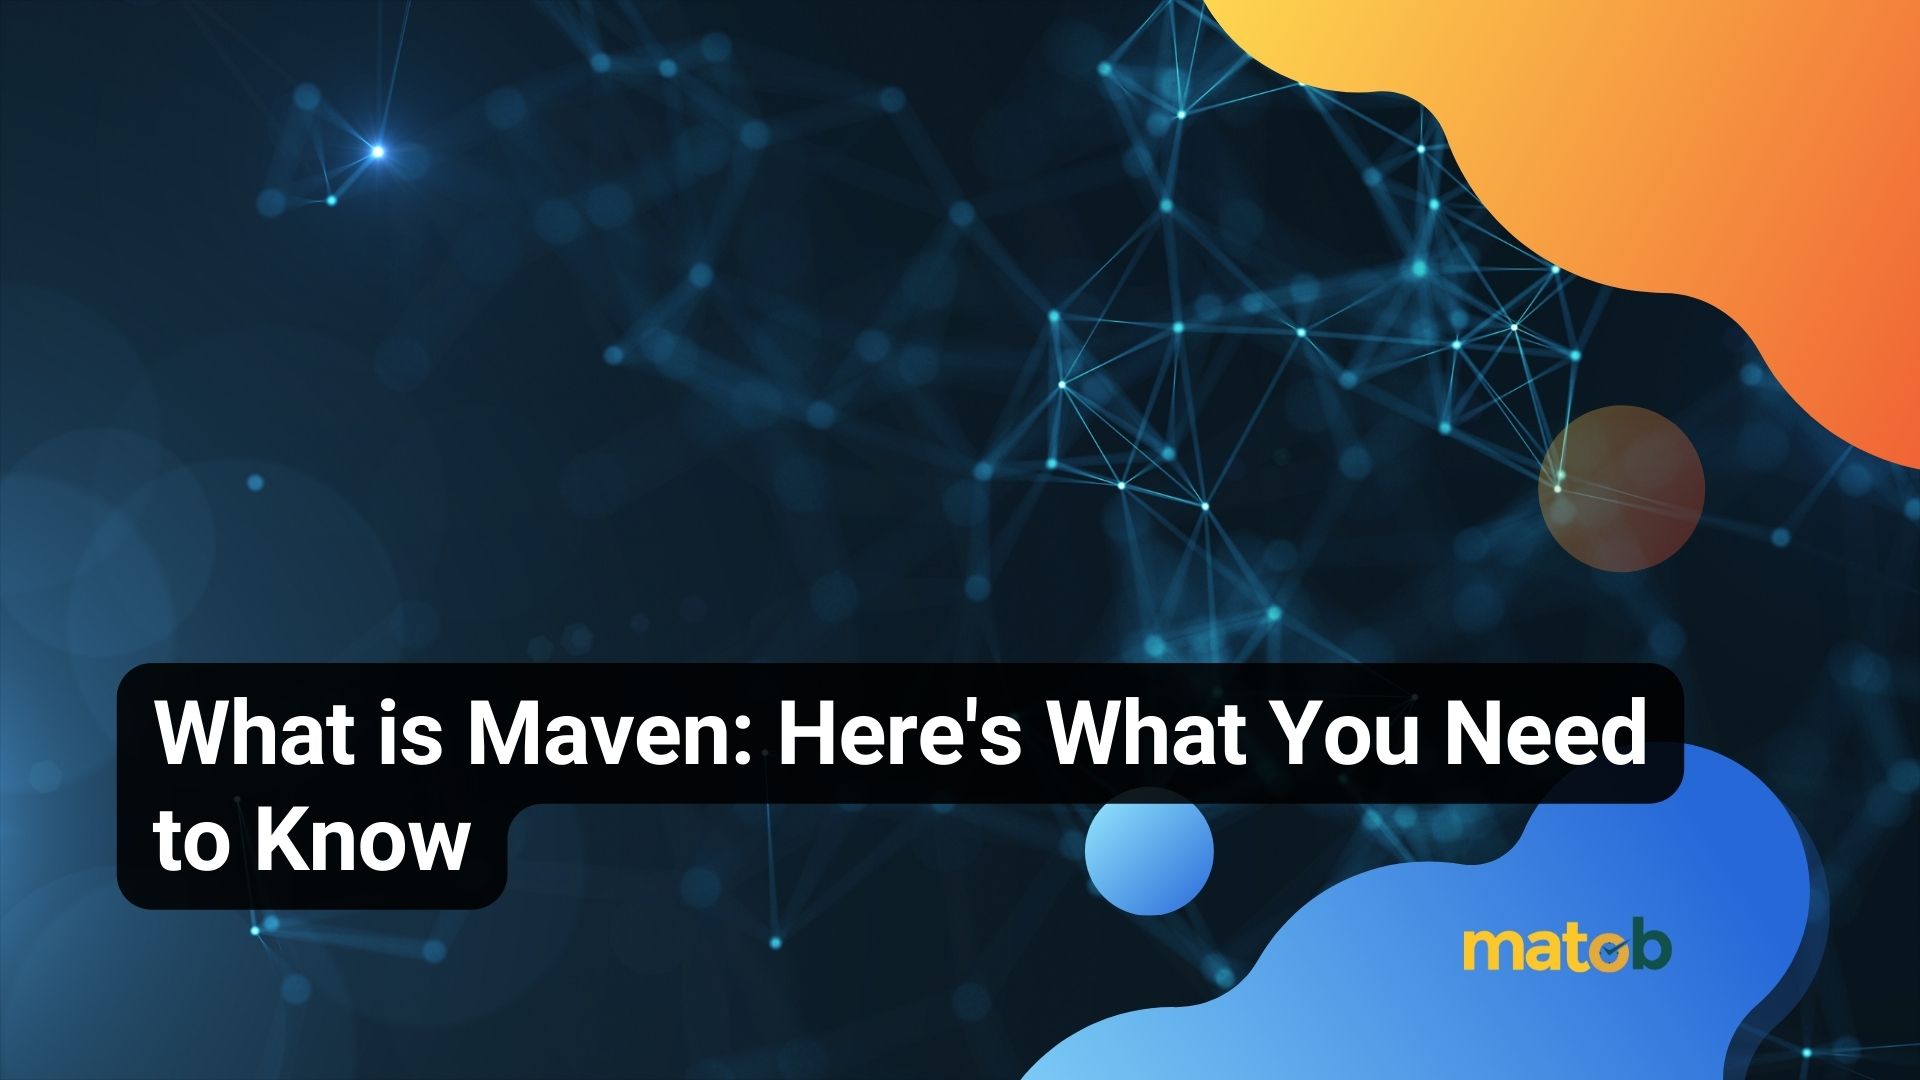 What is Maven: Here's What You Need to Know